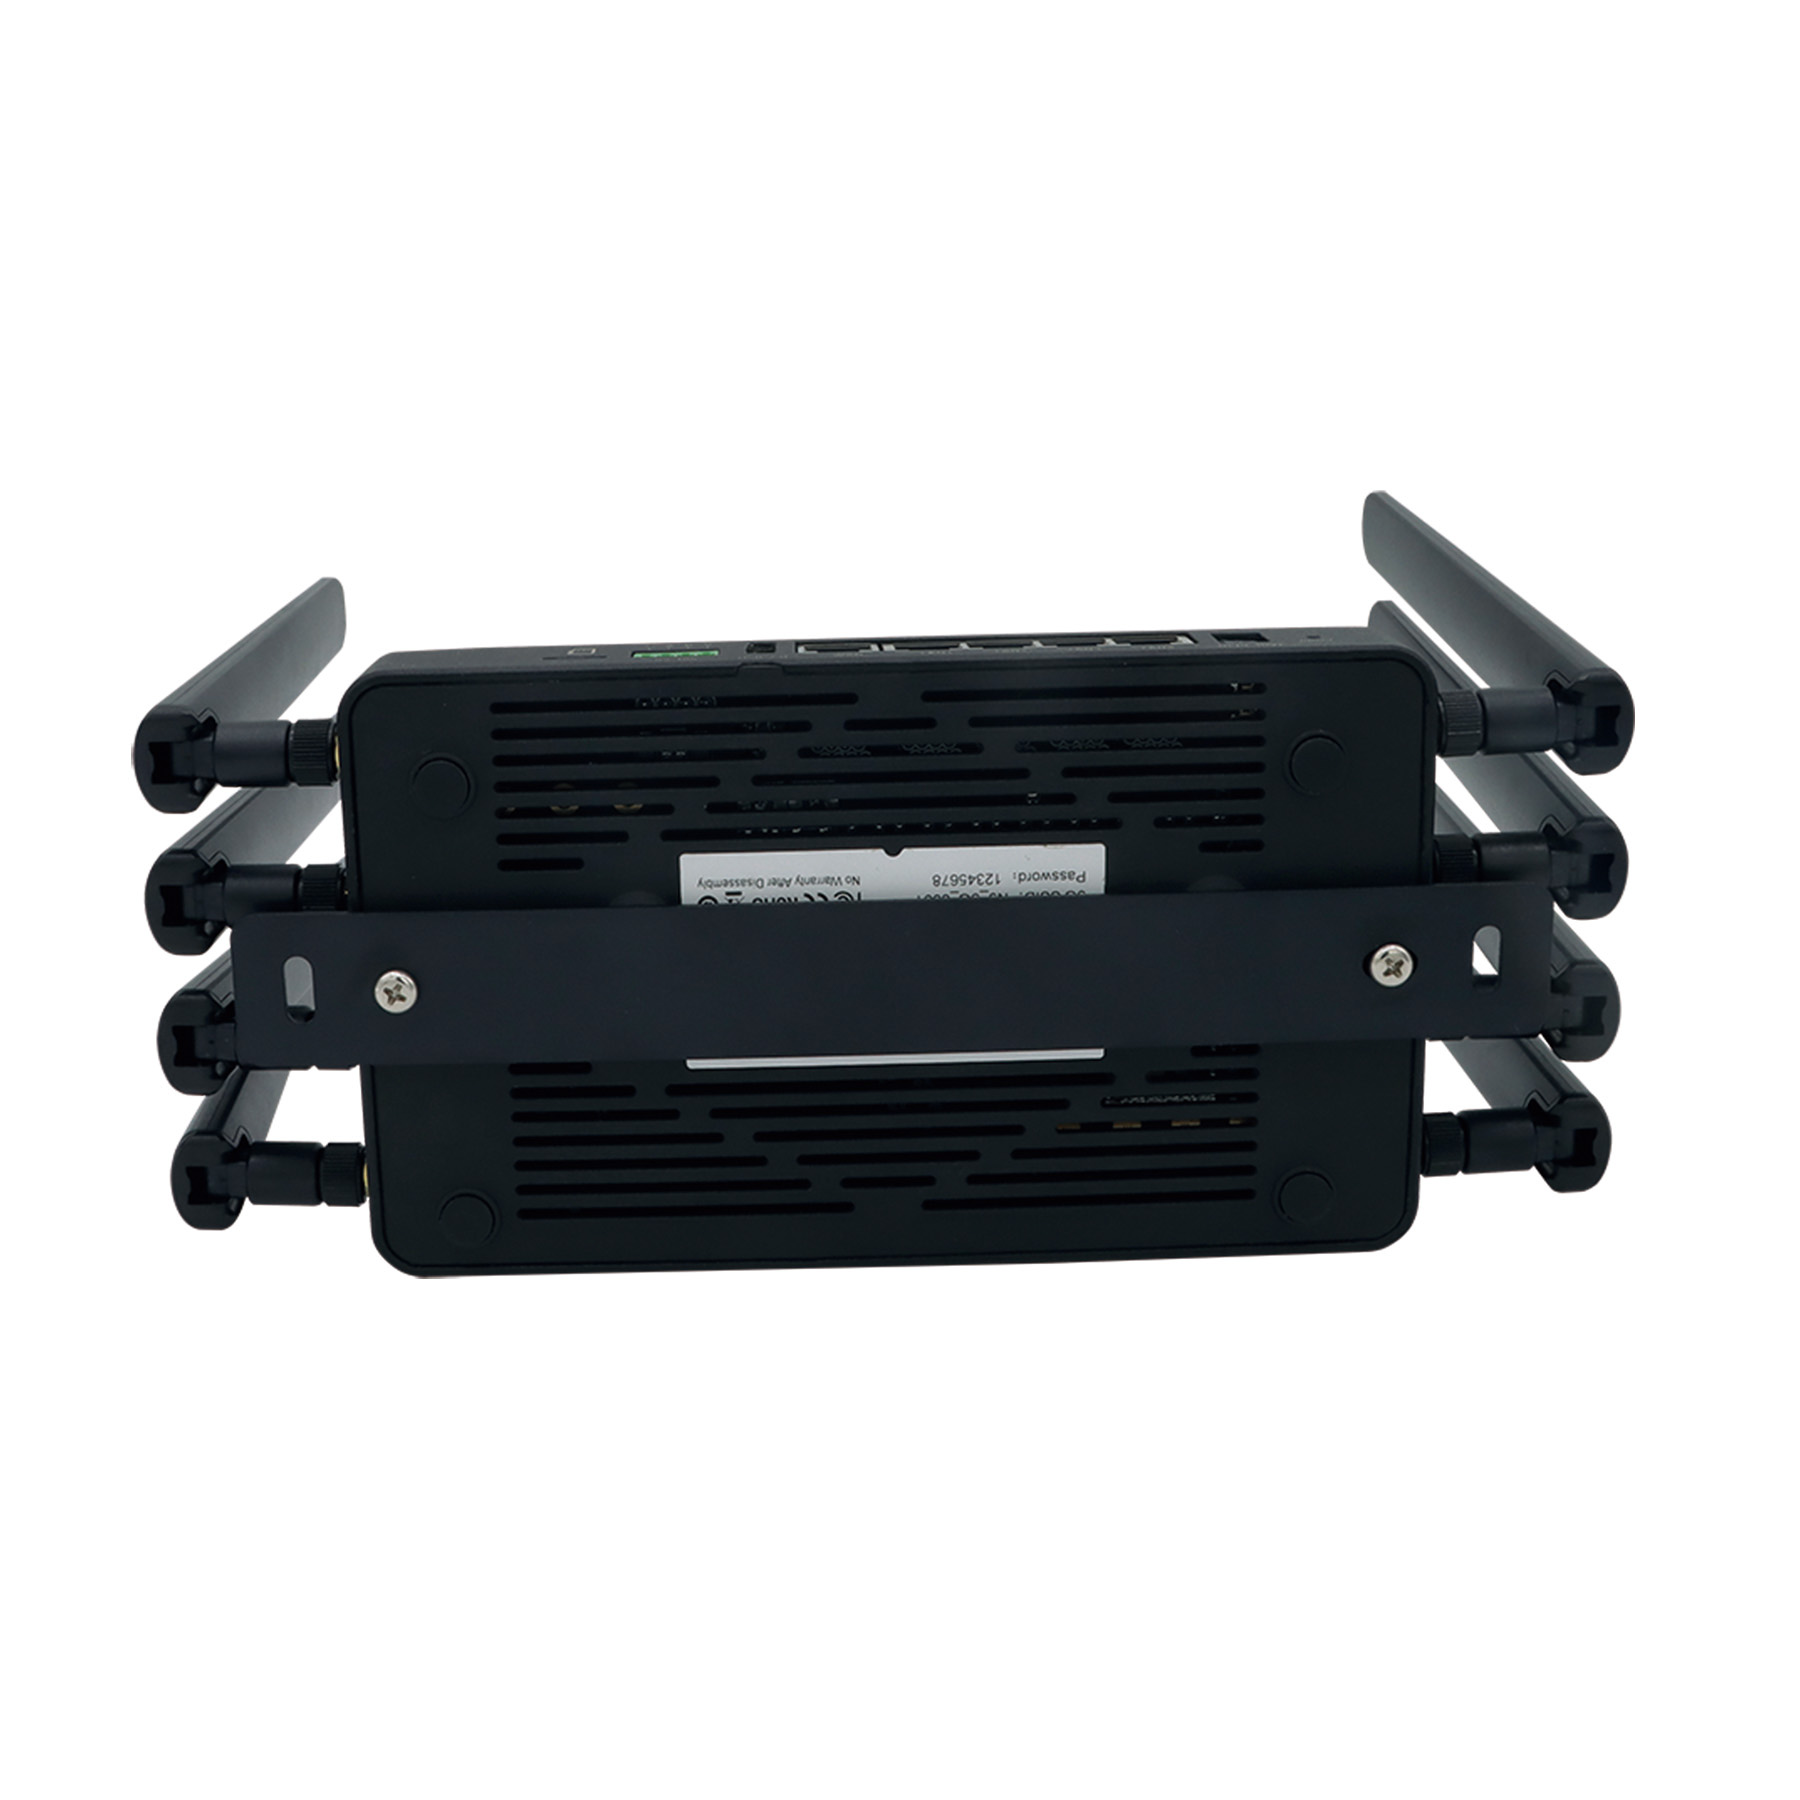 N9 AX1800 Industrial Grade 5G Vehicle Router